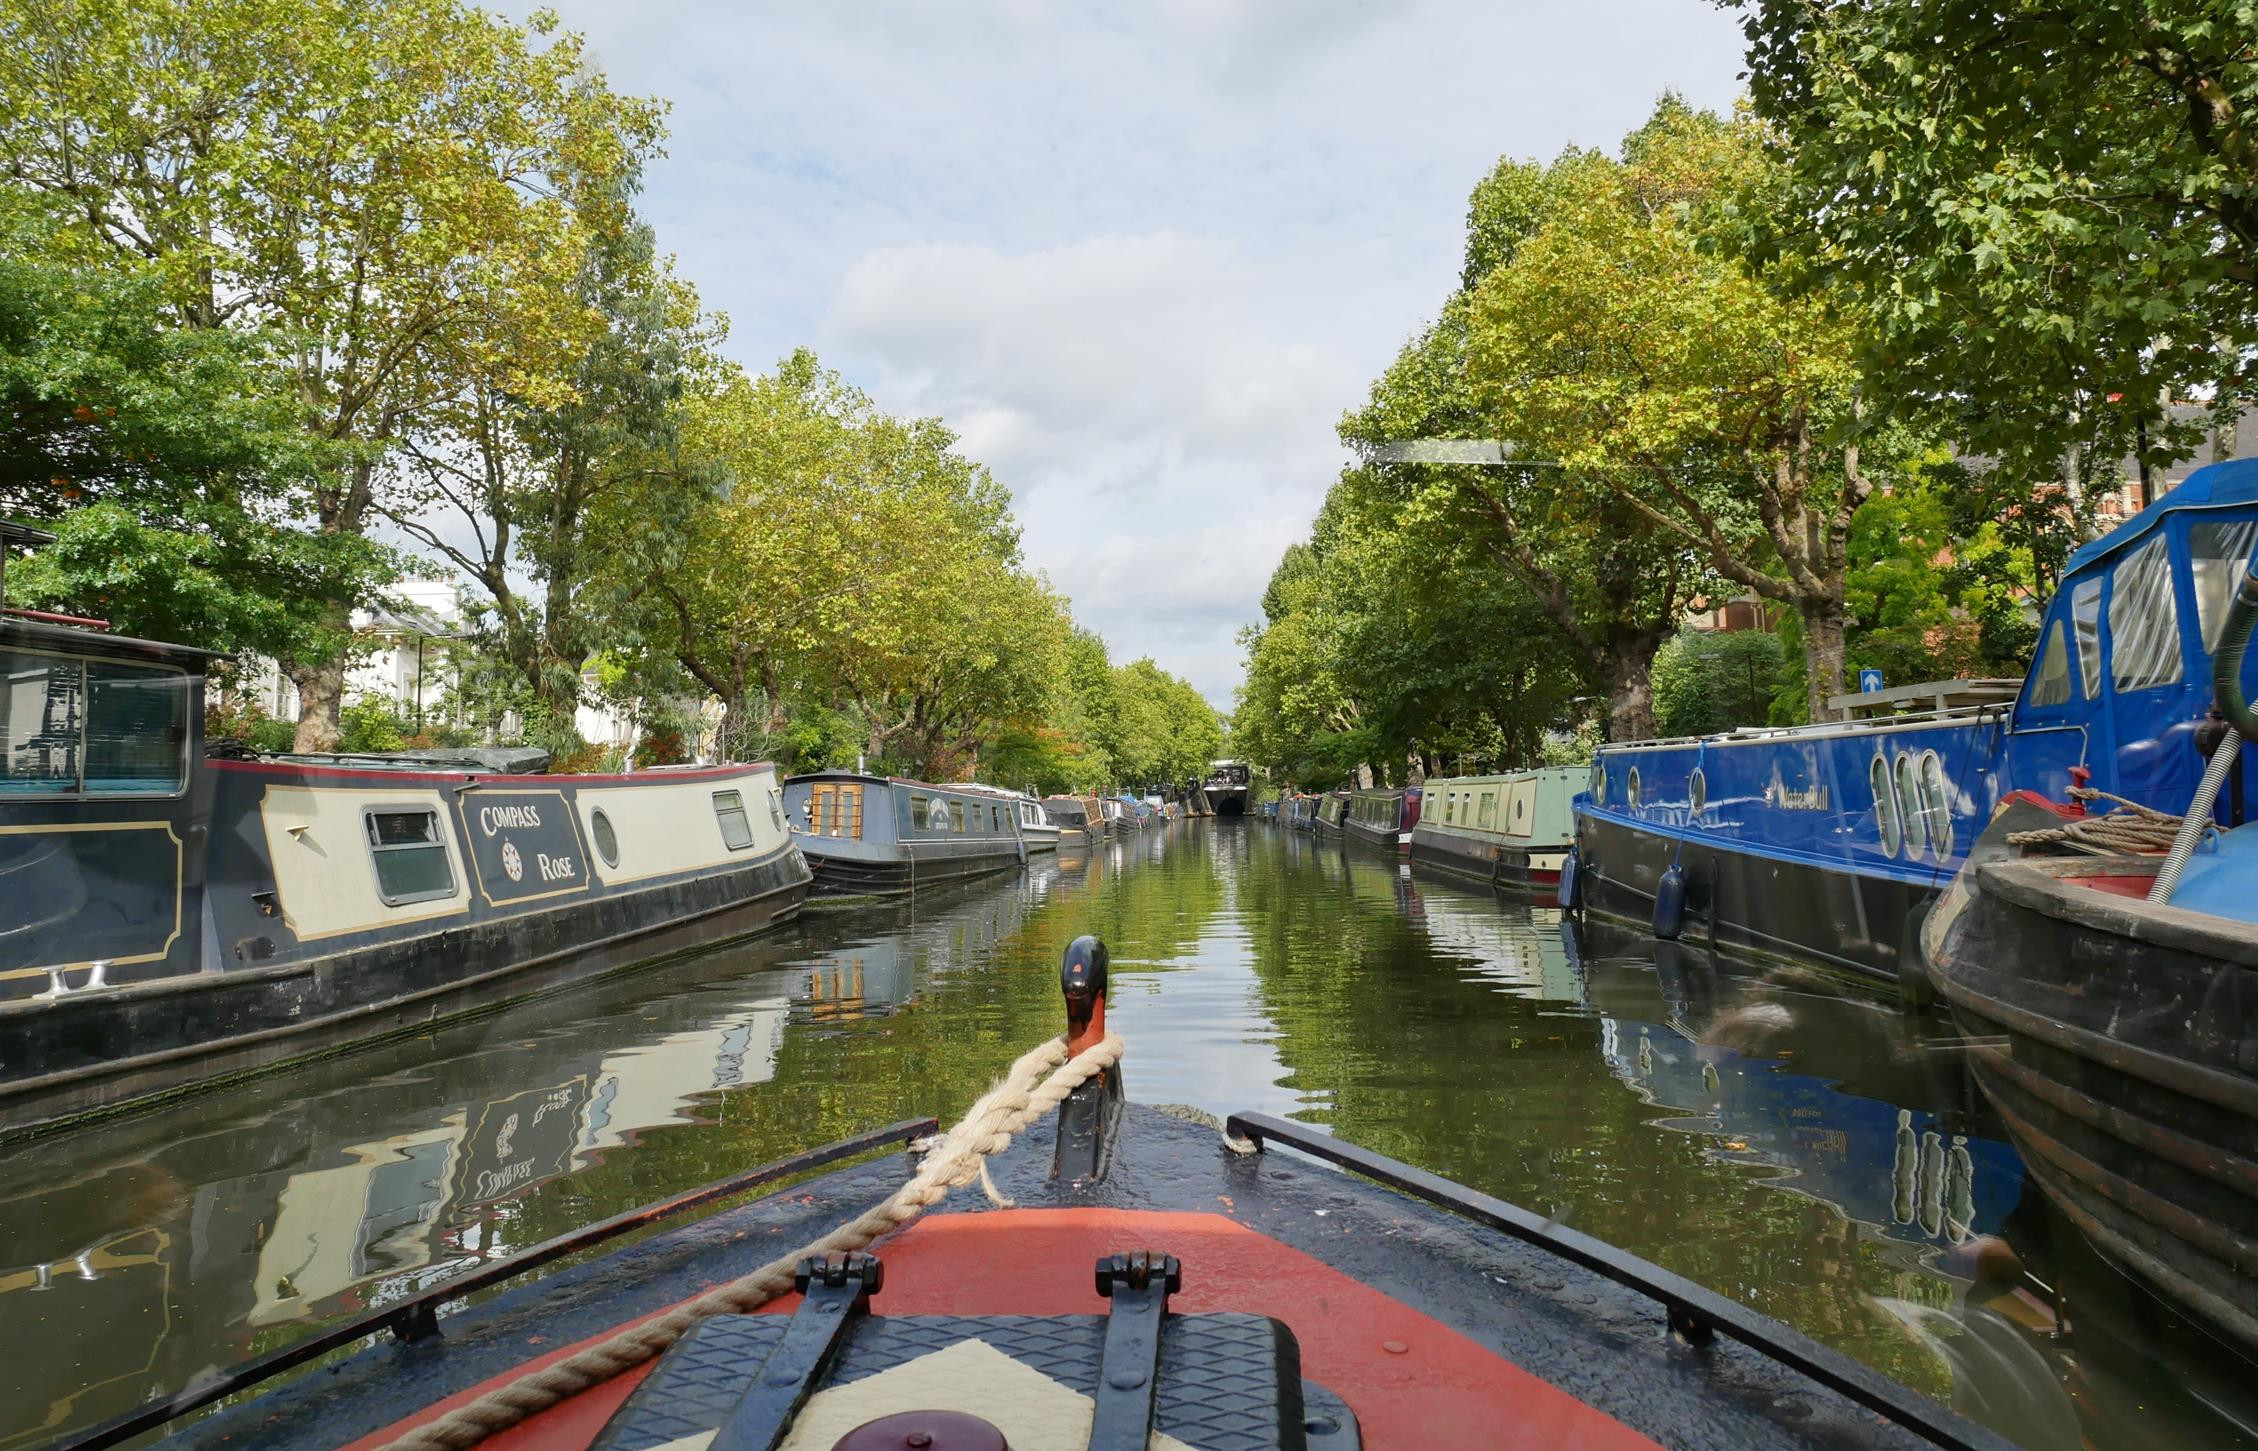 Cruising Regent's Canal to Camden on a narrowboat